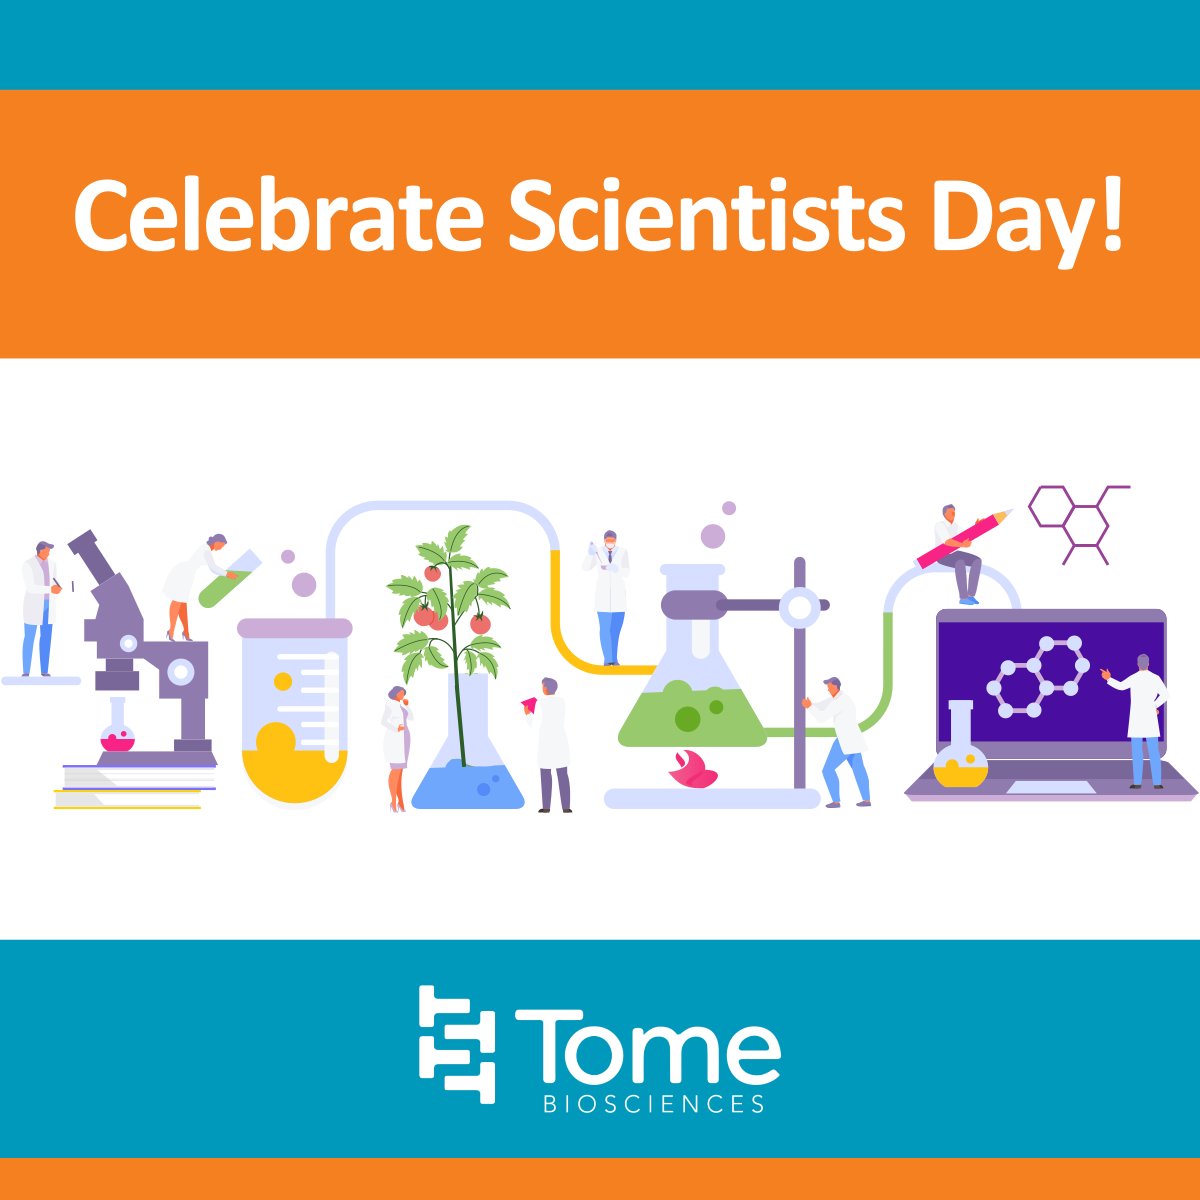 It’s #CelebrateScientistsDay, and today, we recognize the brilliant minds who have dedicated their lives to science. From groundbreaking discoveries to new technological advancements, thank you to all the scientists who have made our world a better place!